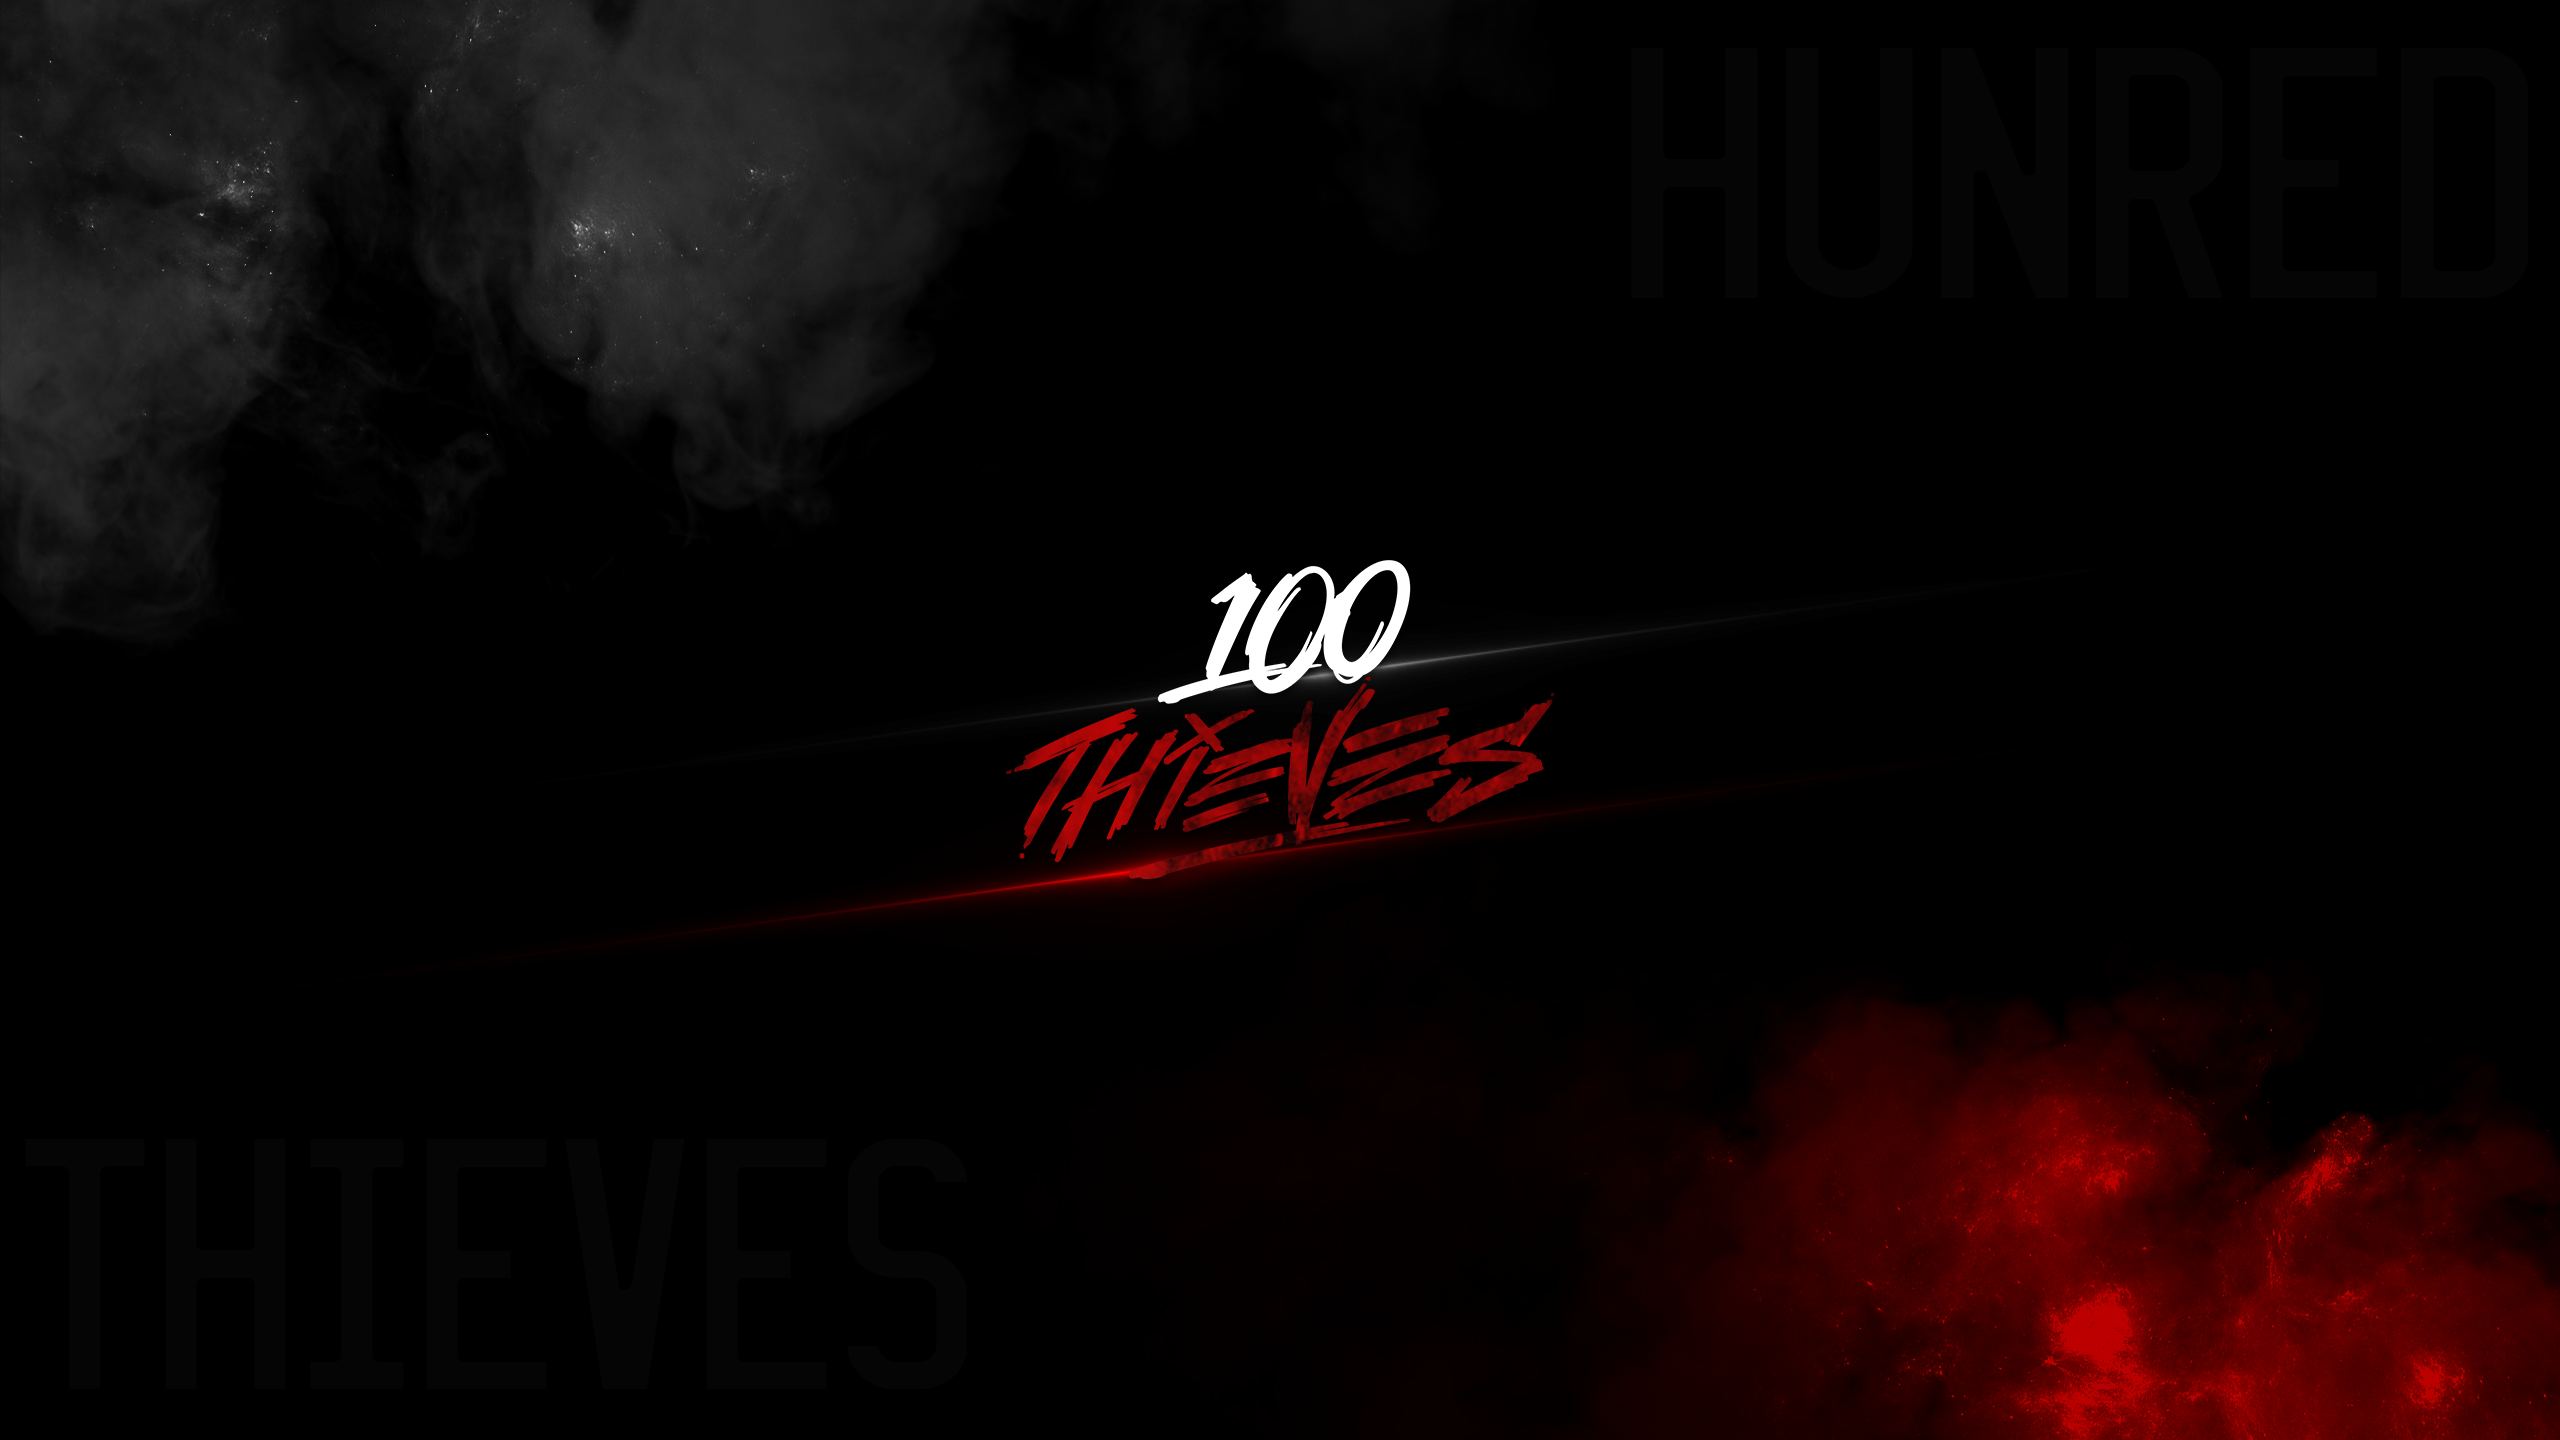 100 Thieves on Twitter Download the hires wallpaper  httpstcoWUbTzQMAEt  Twitter